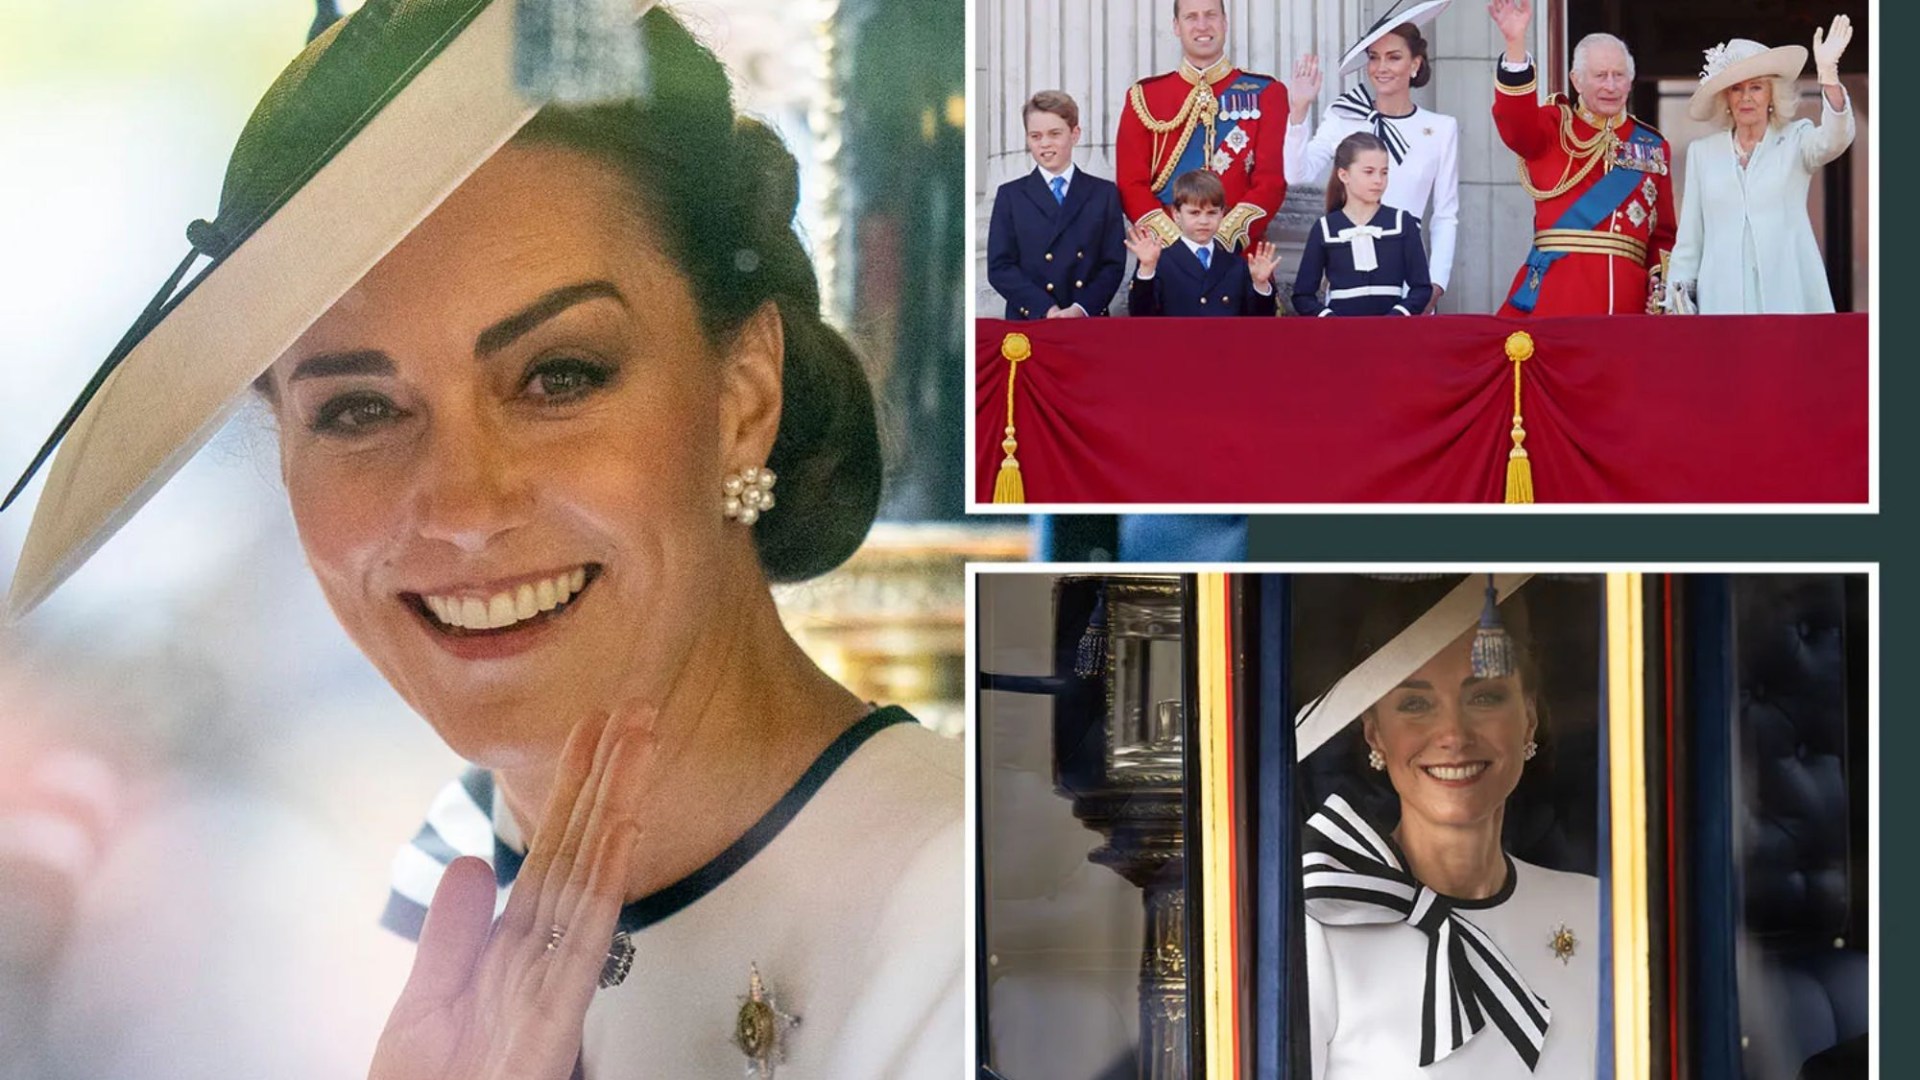 Princess Kate update after she made her first public appearance since cancer diagnosis at Trooping the Colour [Video]